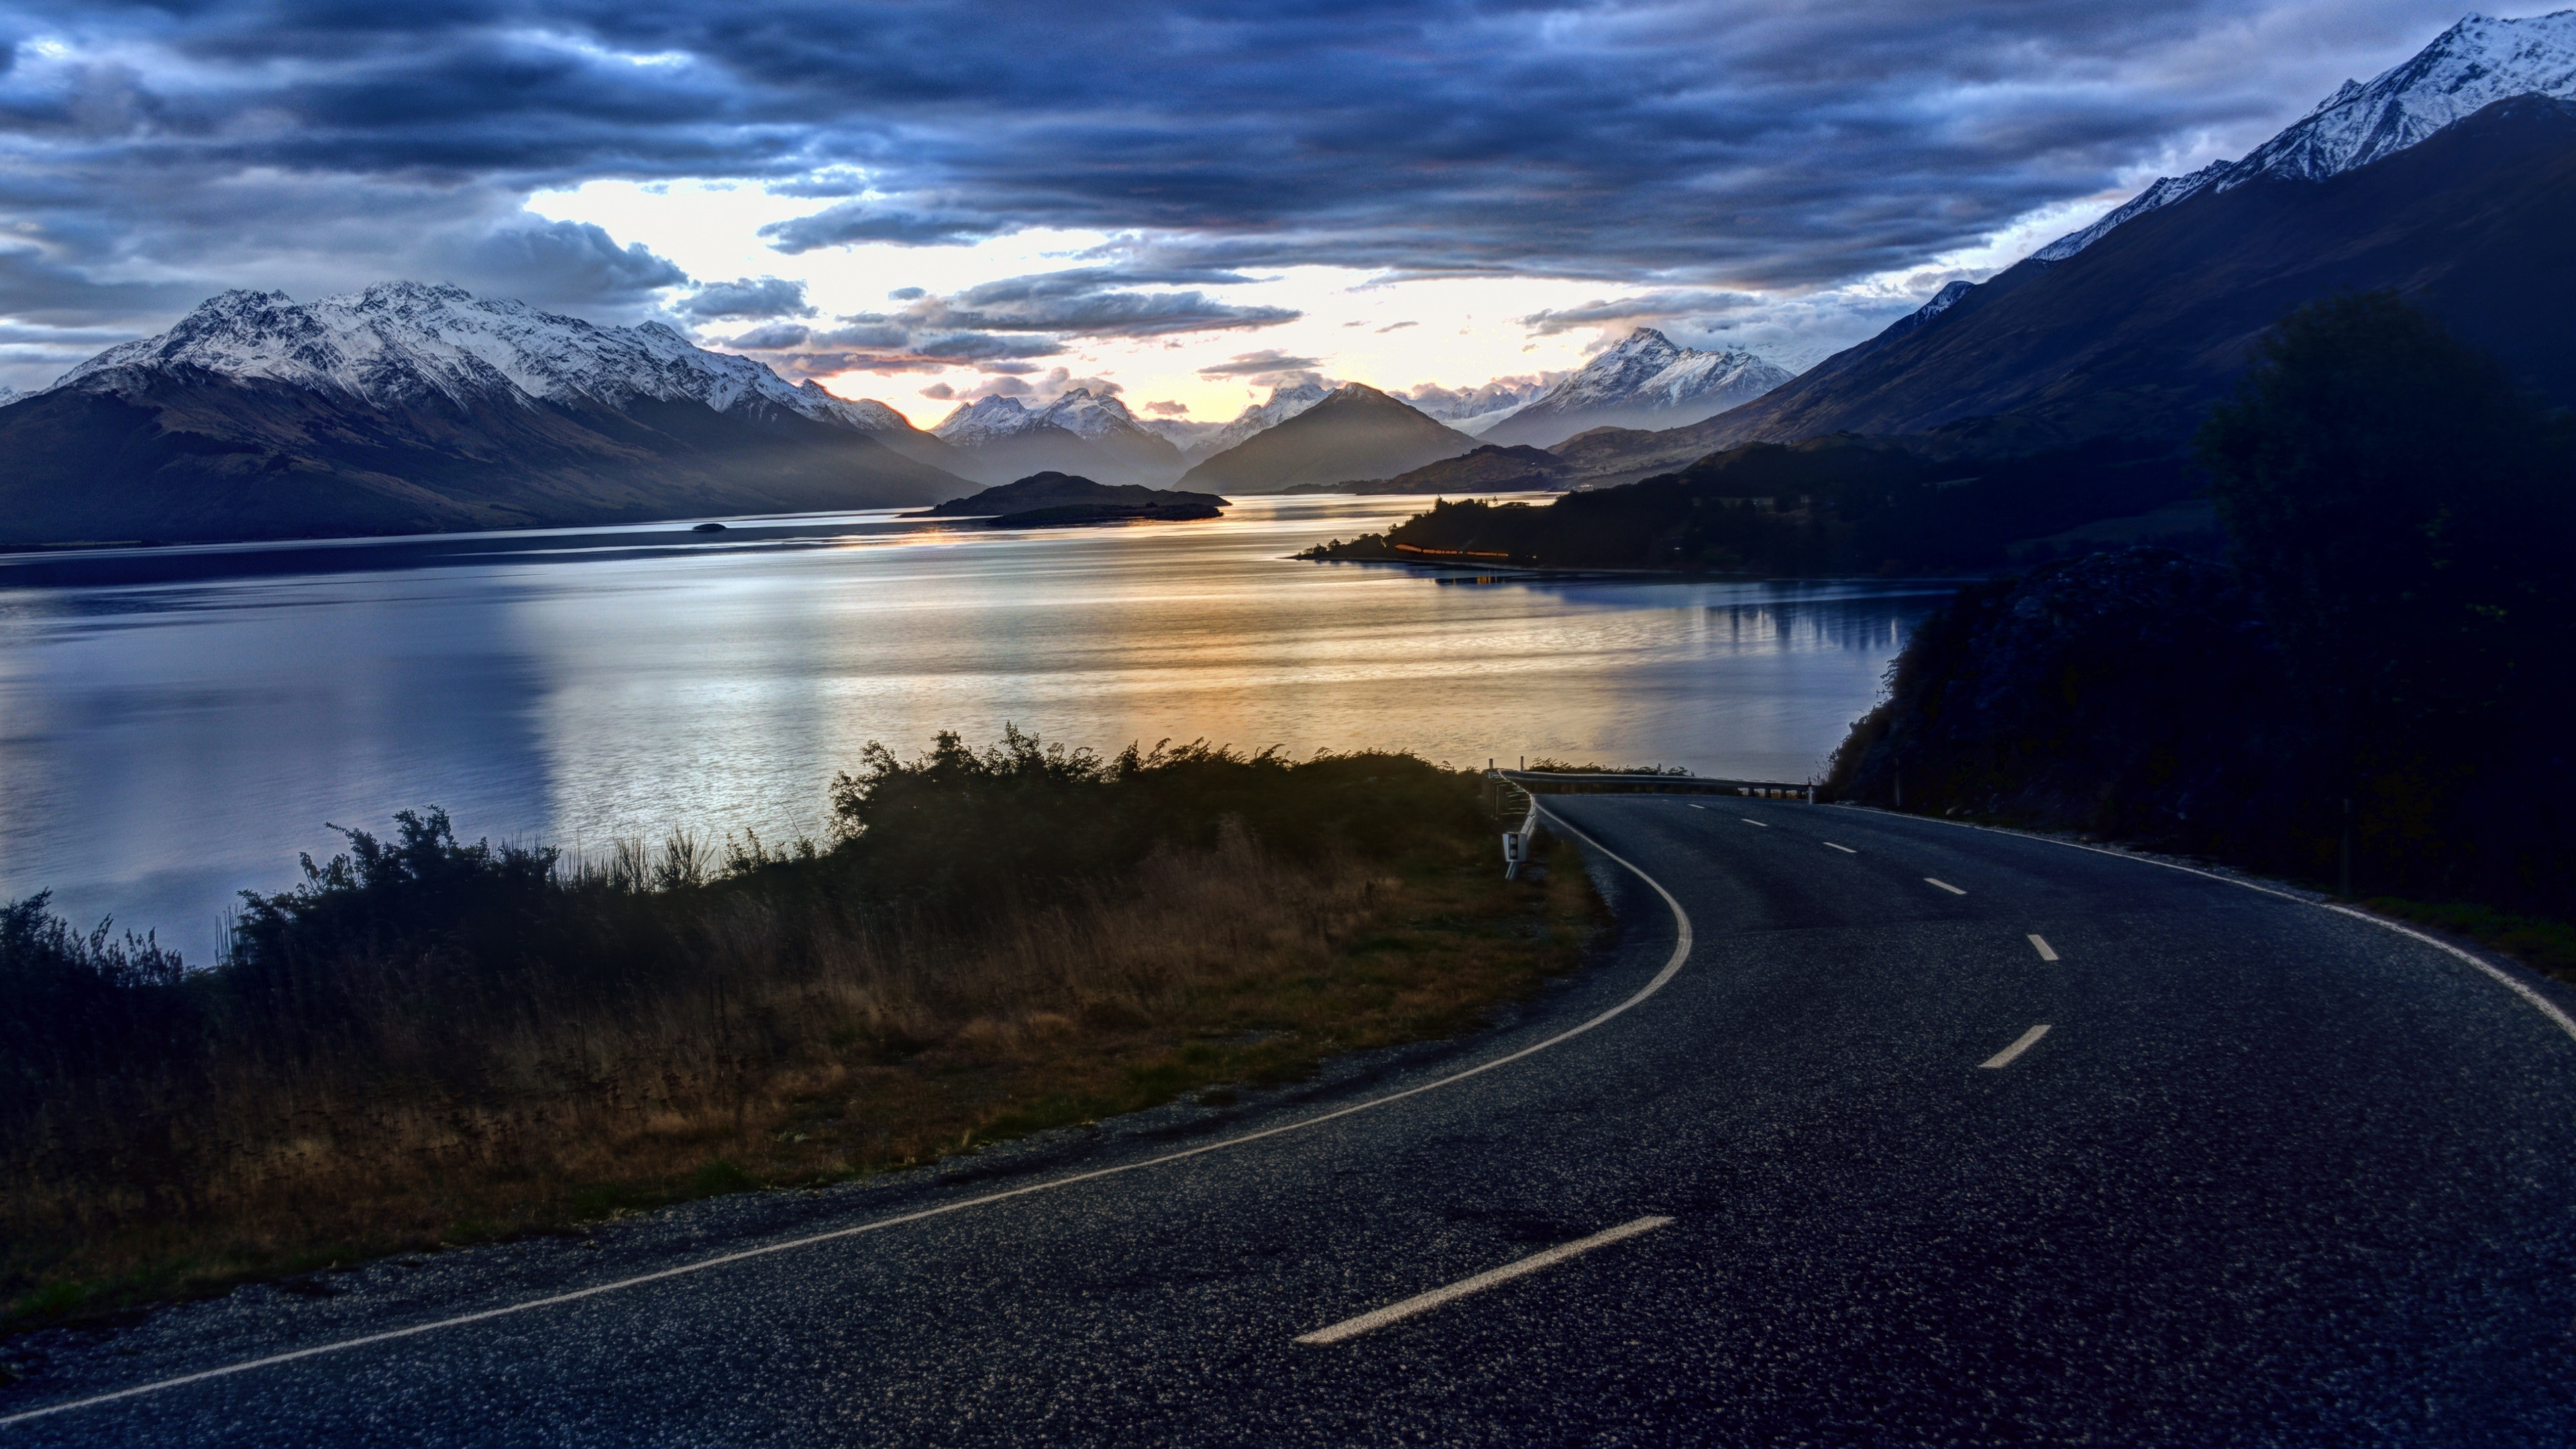 new-zealand-3840x2160-nature-sky-clouds-lake-road-landscape-water-919.jpg